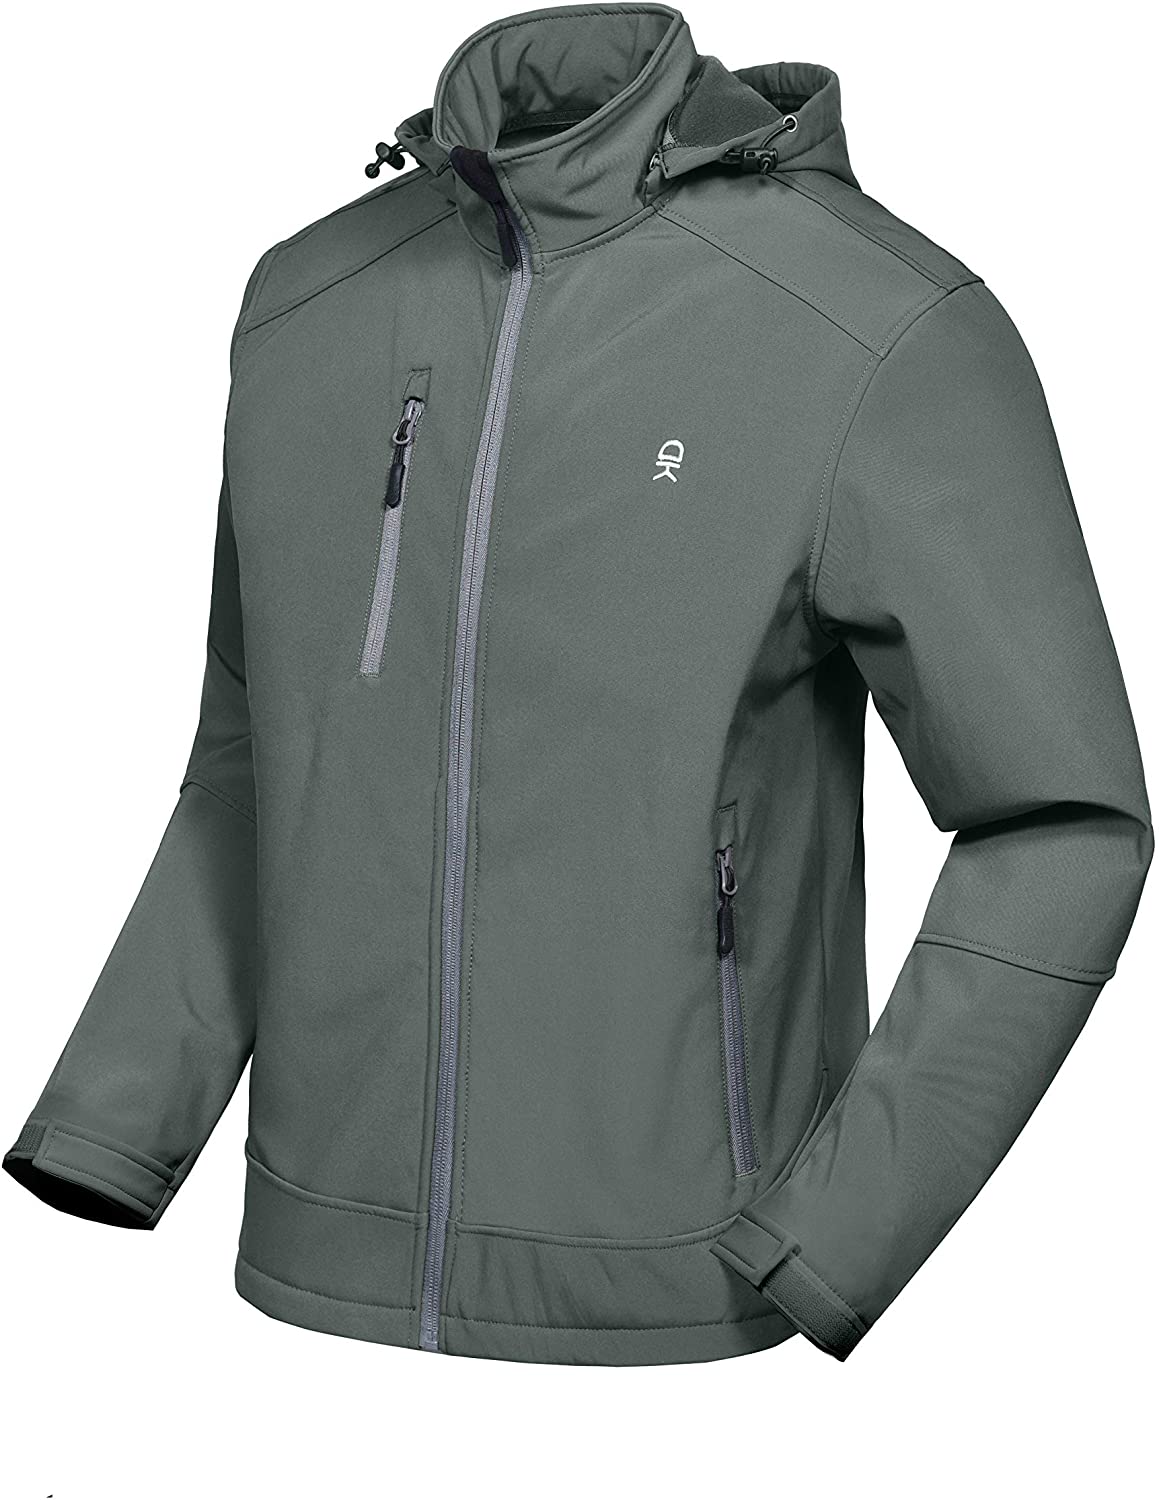 Little Donkey Andy Women's Softshell Jacket Ski Jacket with Removable Hood Fleece Lined and Water Repellent 